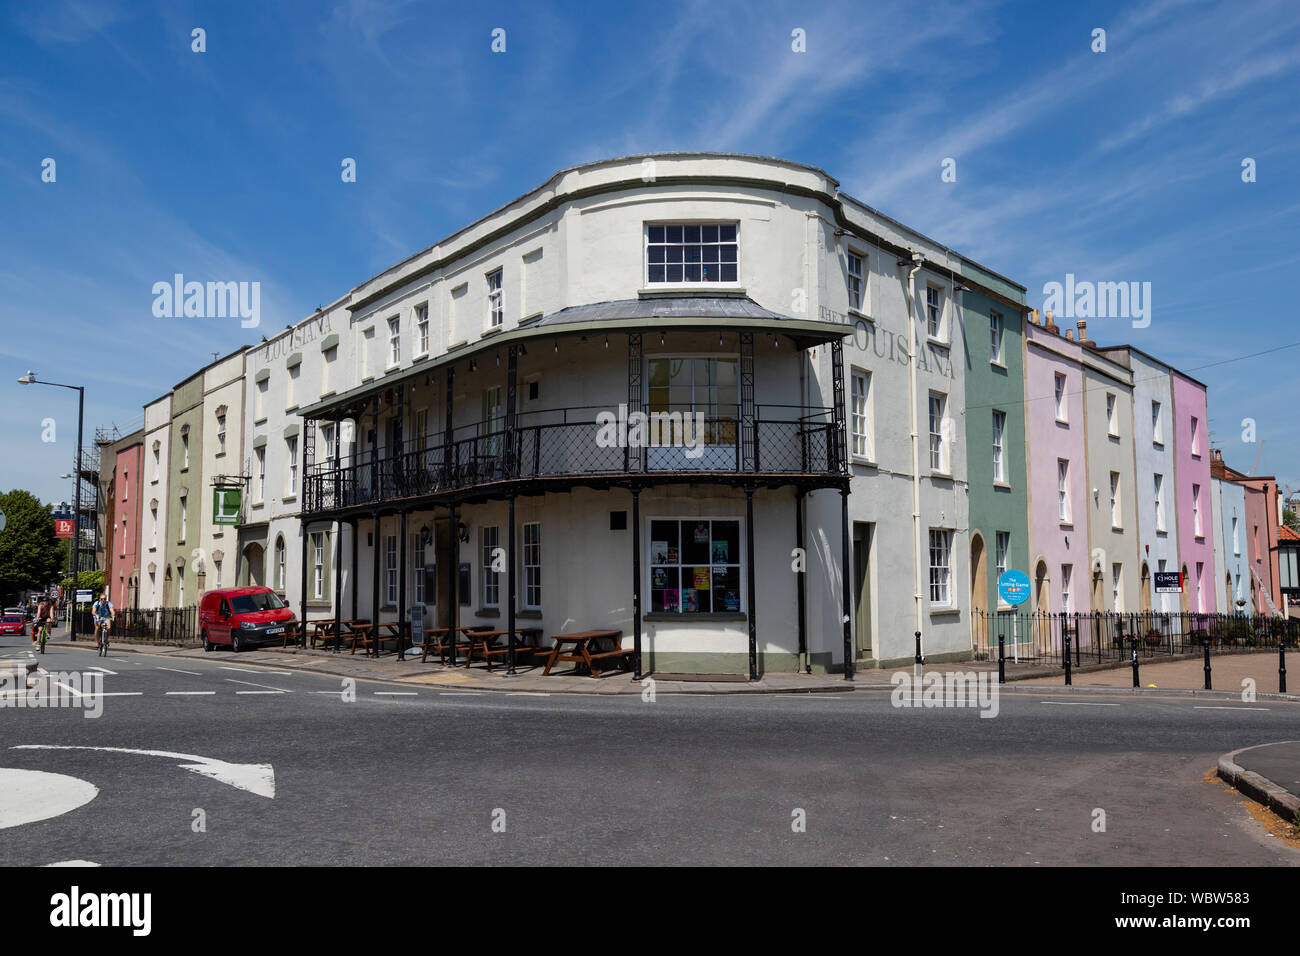 The Louisiana pub on Wapping Road, Bristol, a well-known music venue. Stock Photo